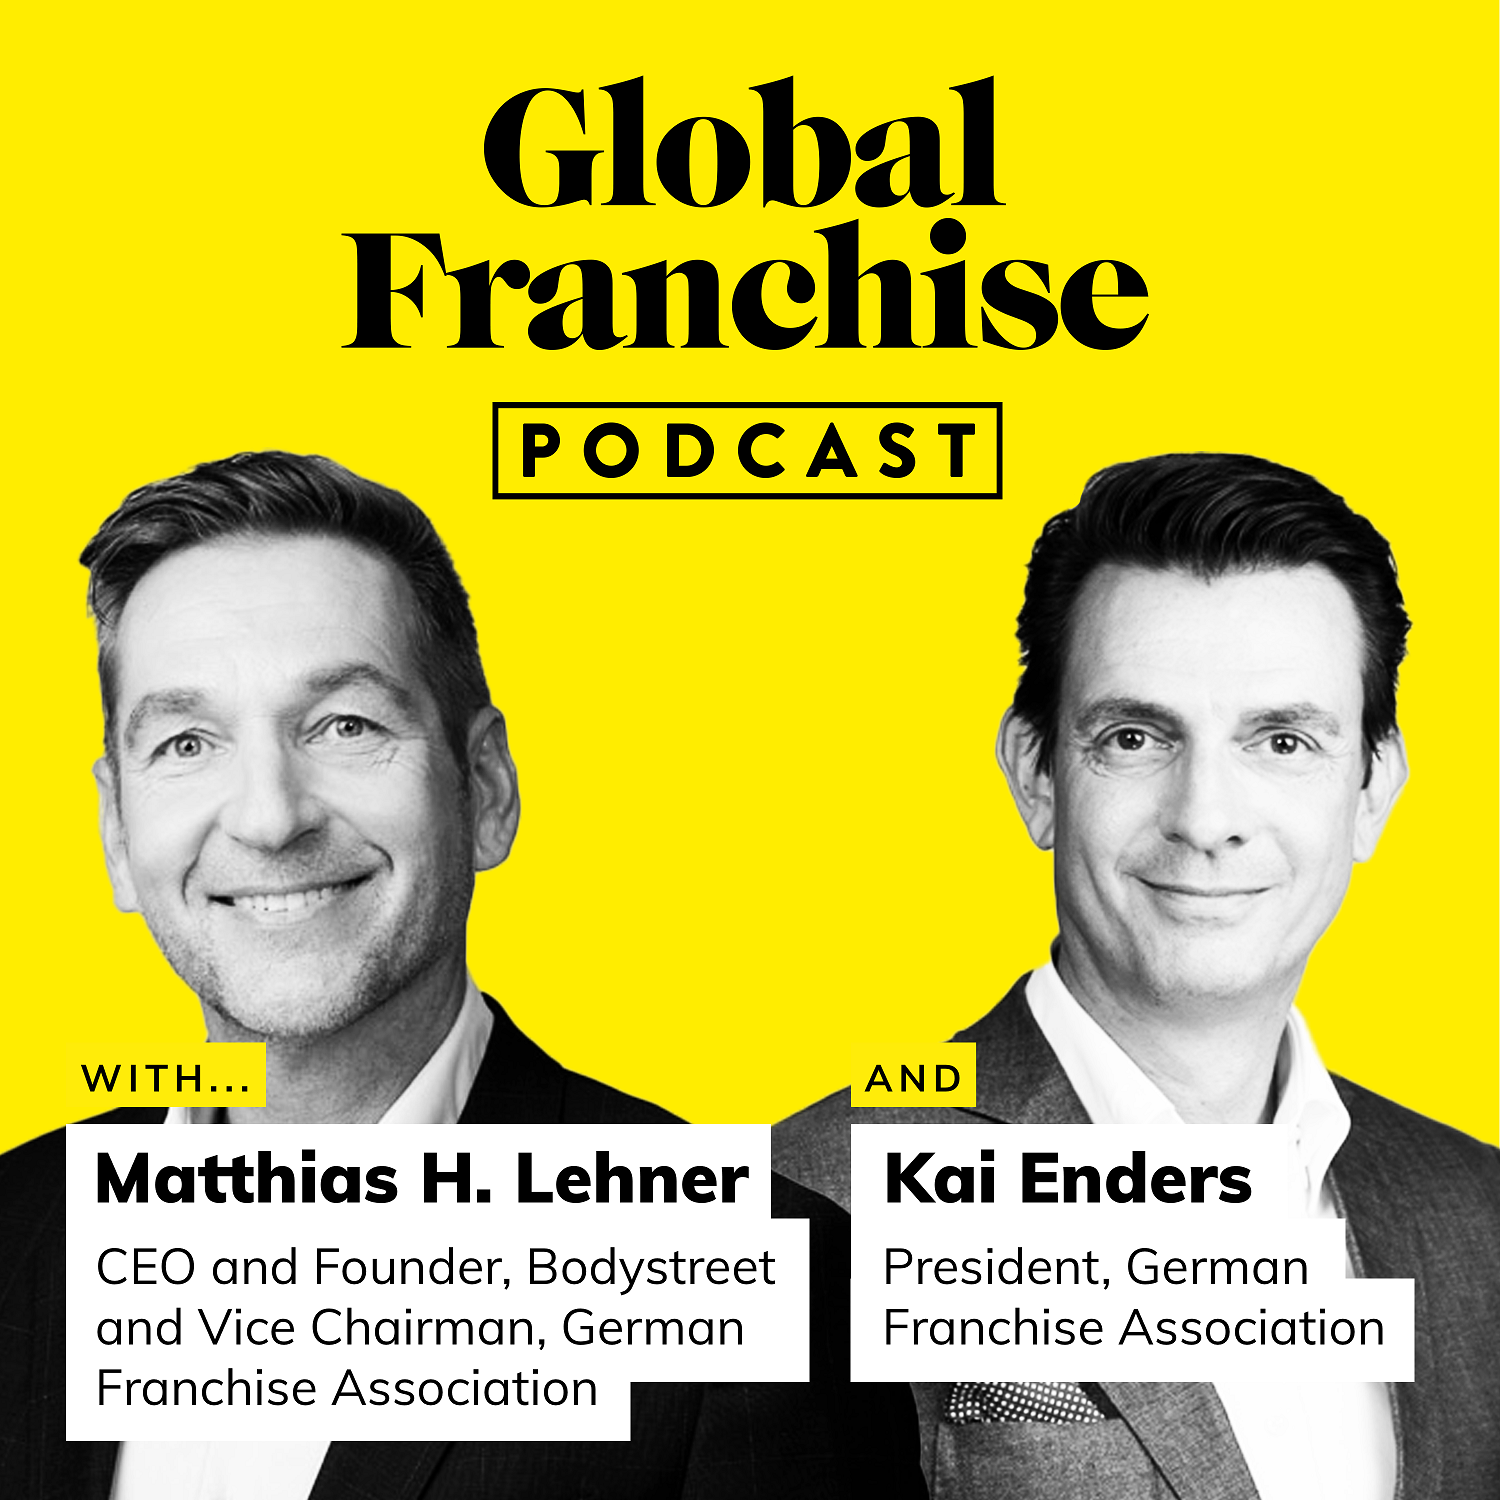 Understanding The Strength Of German Franchising With Matthias Lehner And Kai Enders Of The German Franchise Association